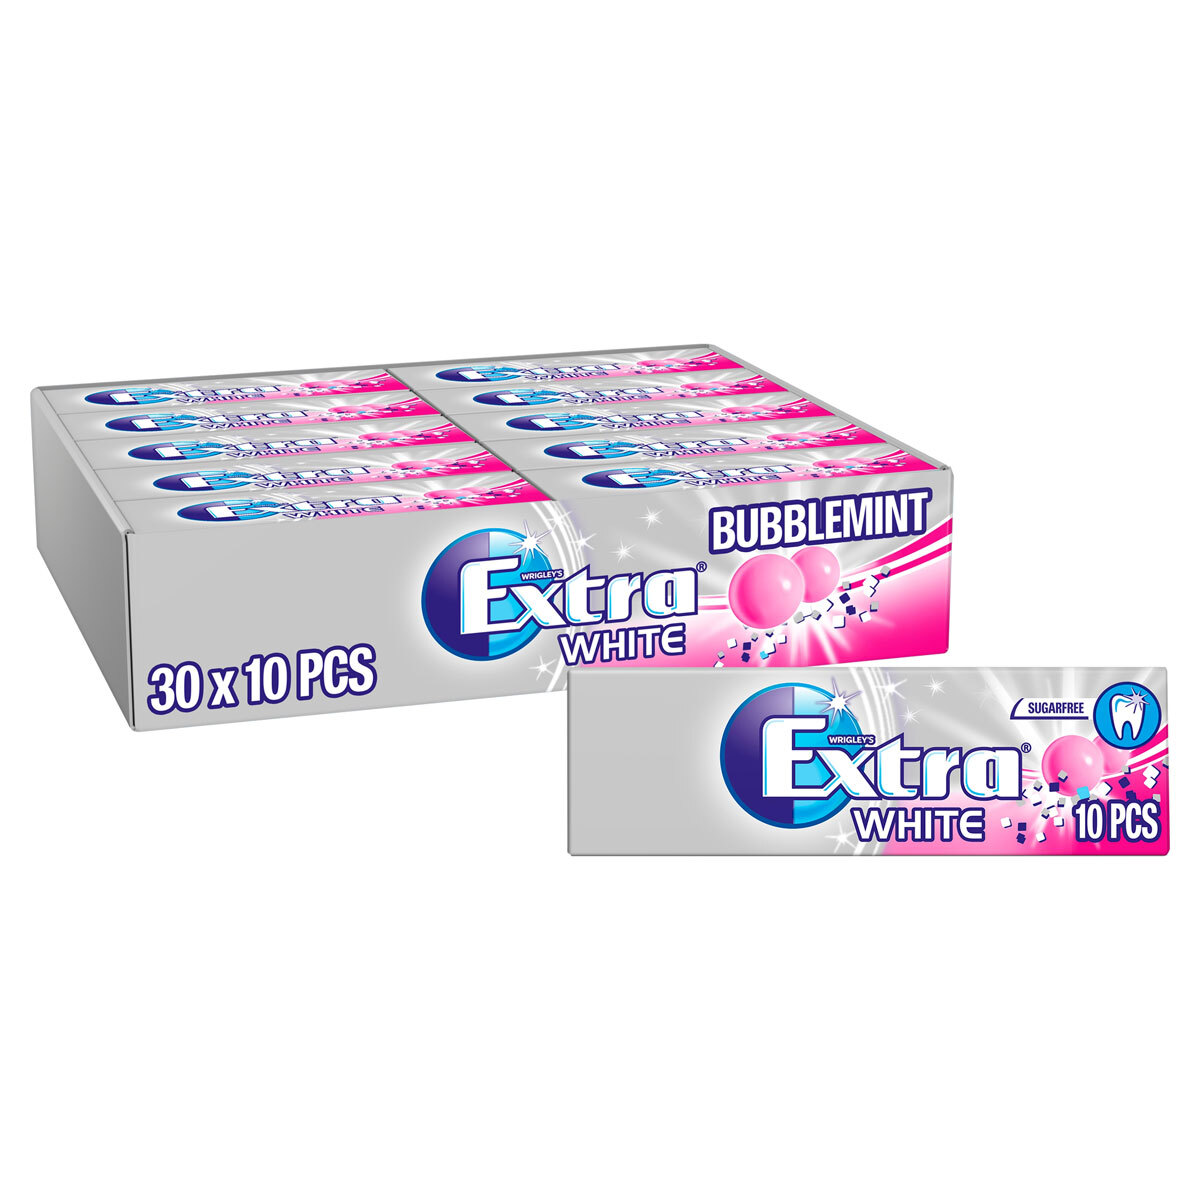 Wrigley's Extra Bubblemint White Gum, 30 x 10 Pack